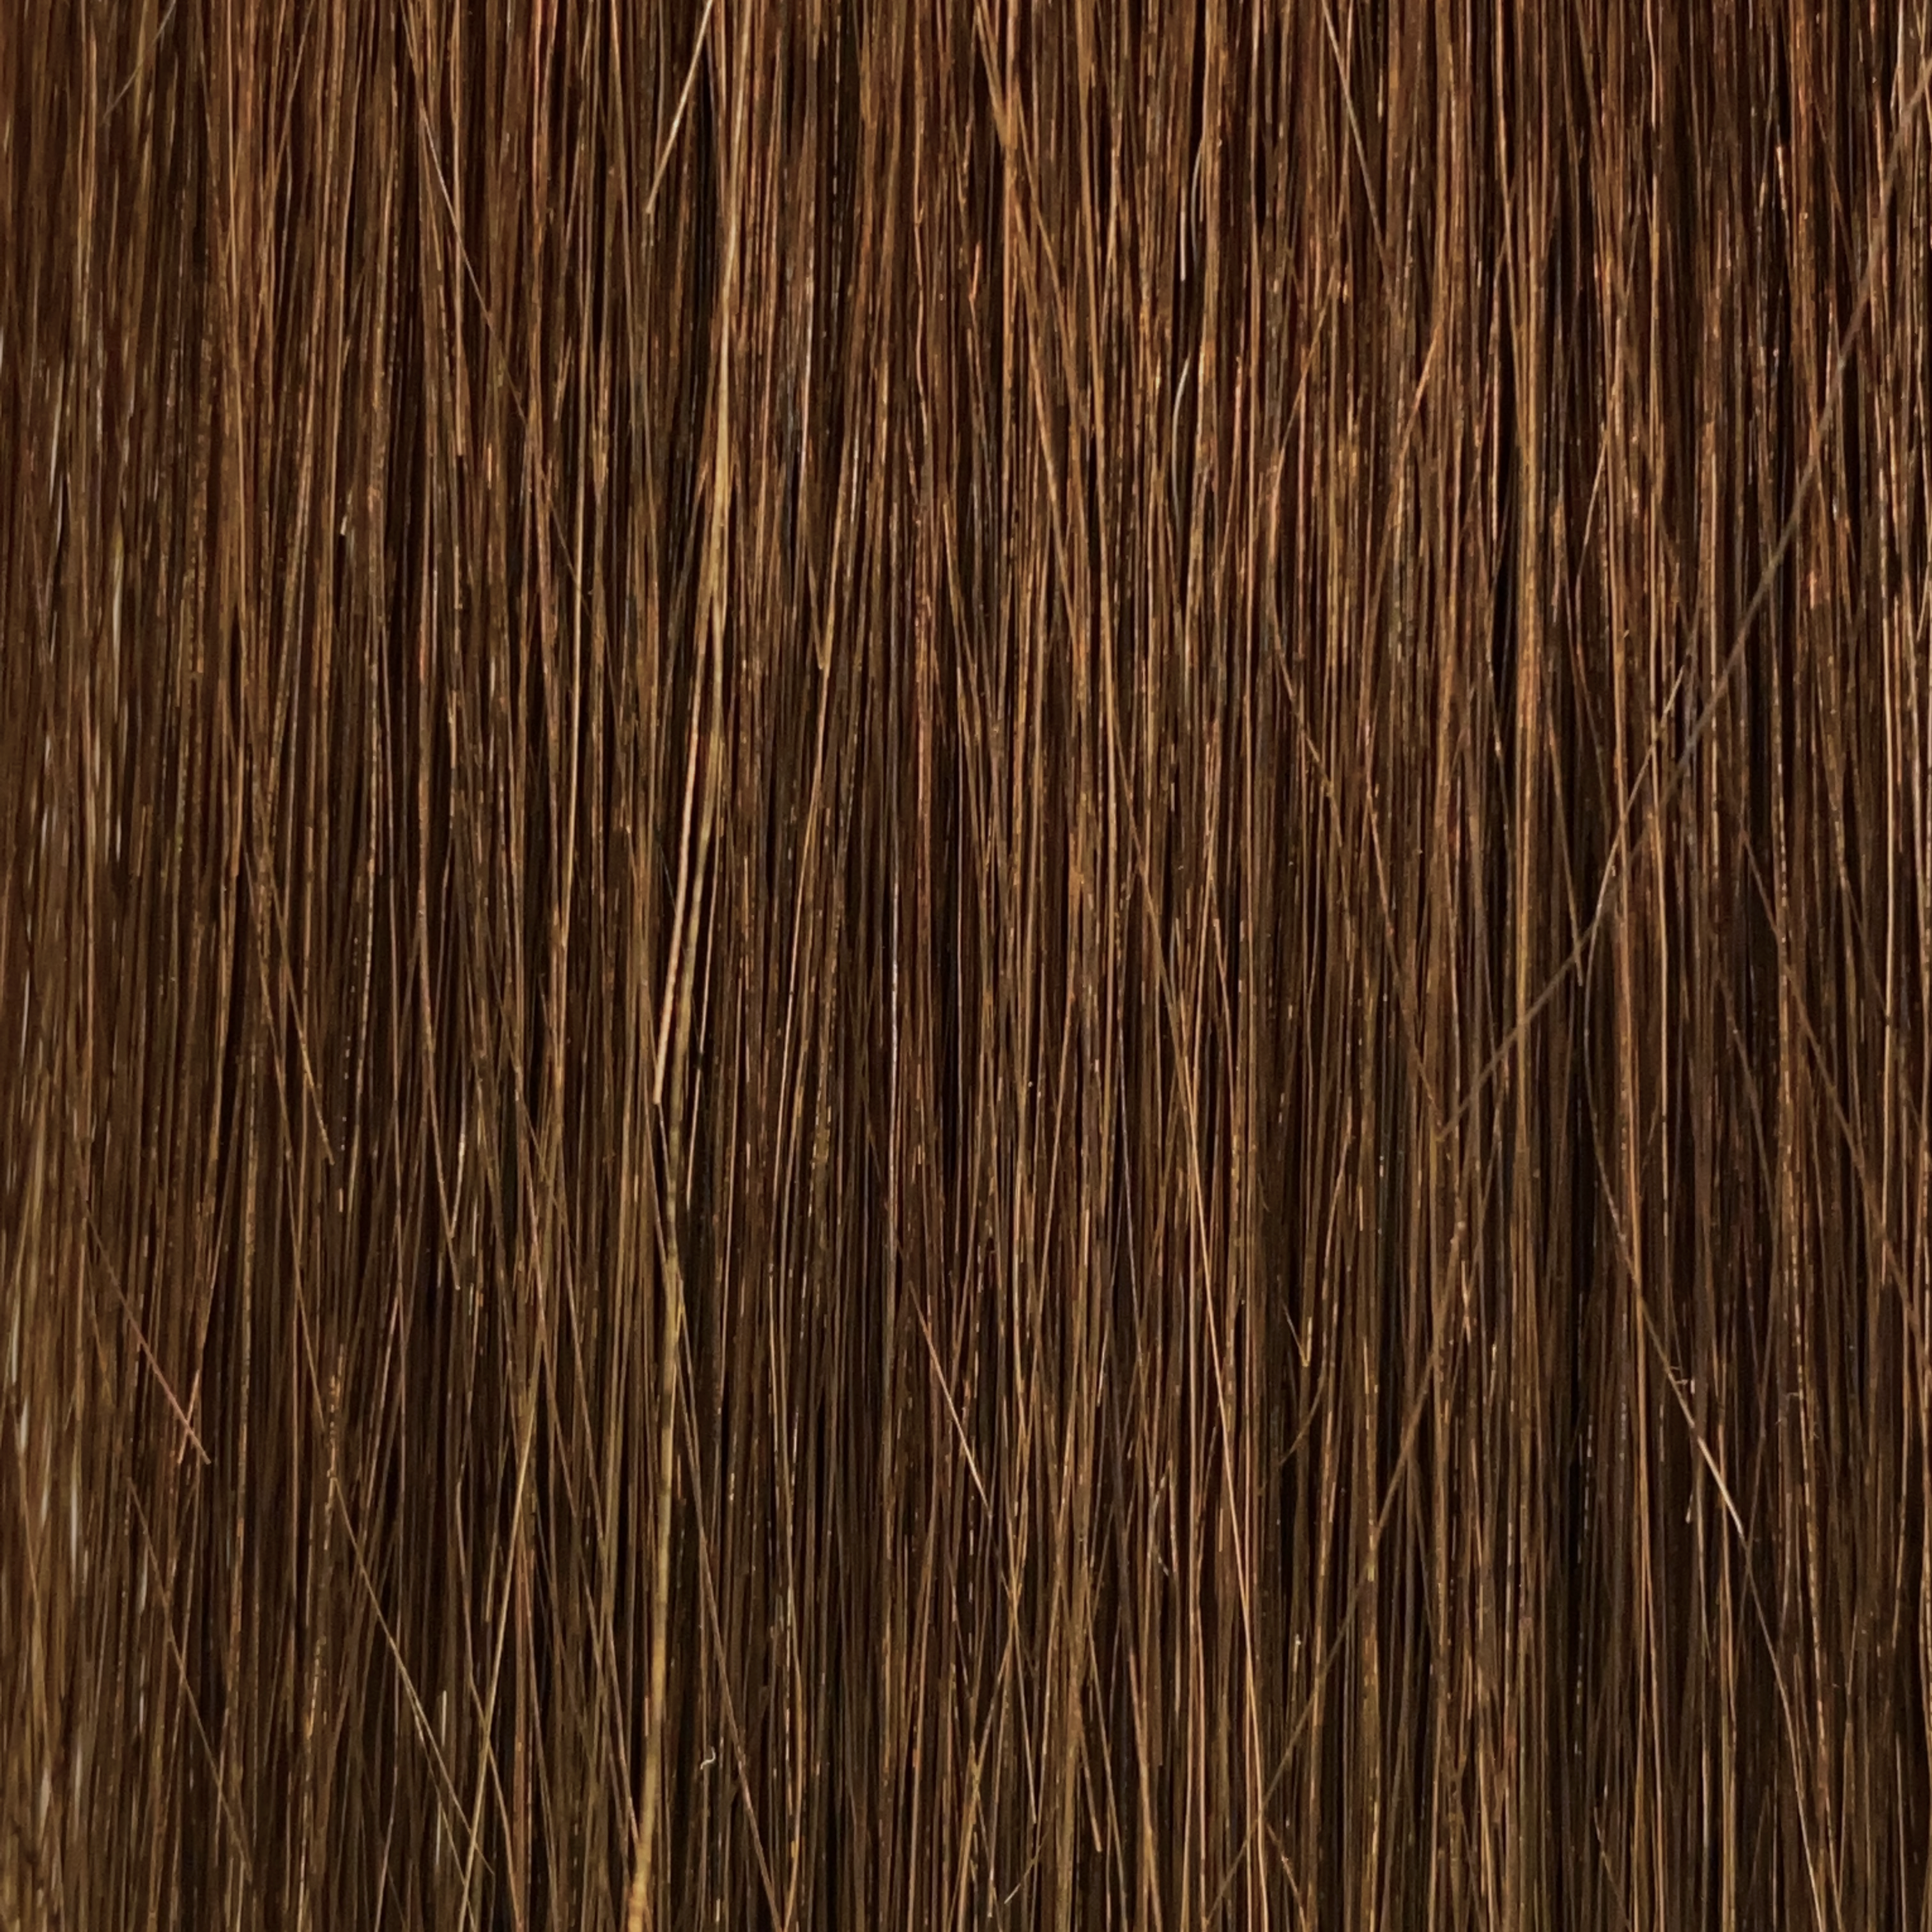 40 cm | Normal Tape Extensions | No. 04 hazelnut brown